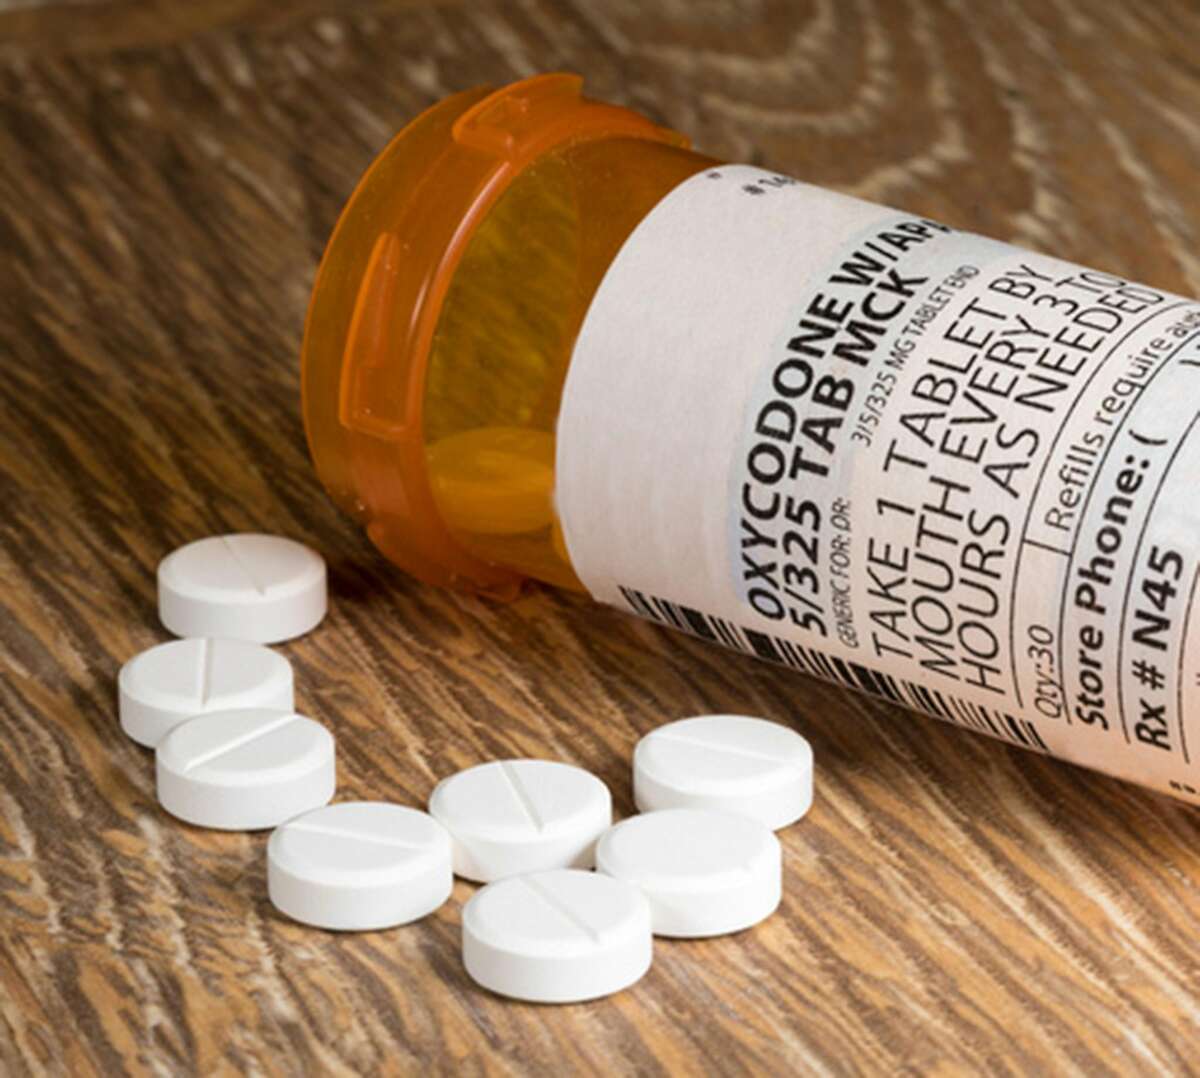 More than 10 percent of hospitalized patients who took one or more opioid painkillers experienced a side effect tied to the drug, according to a study published Wednesday in the journal JAMA Surgery. (Dreamstime)